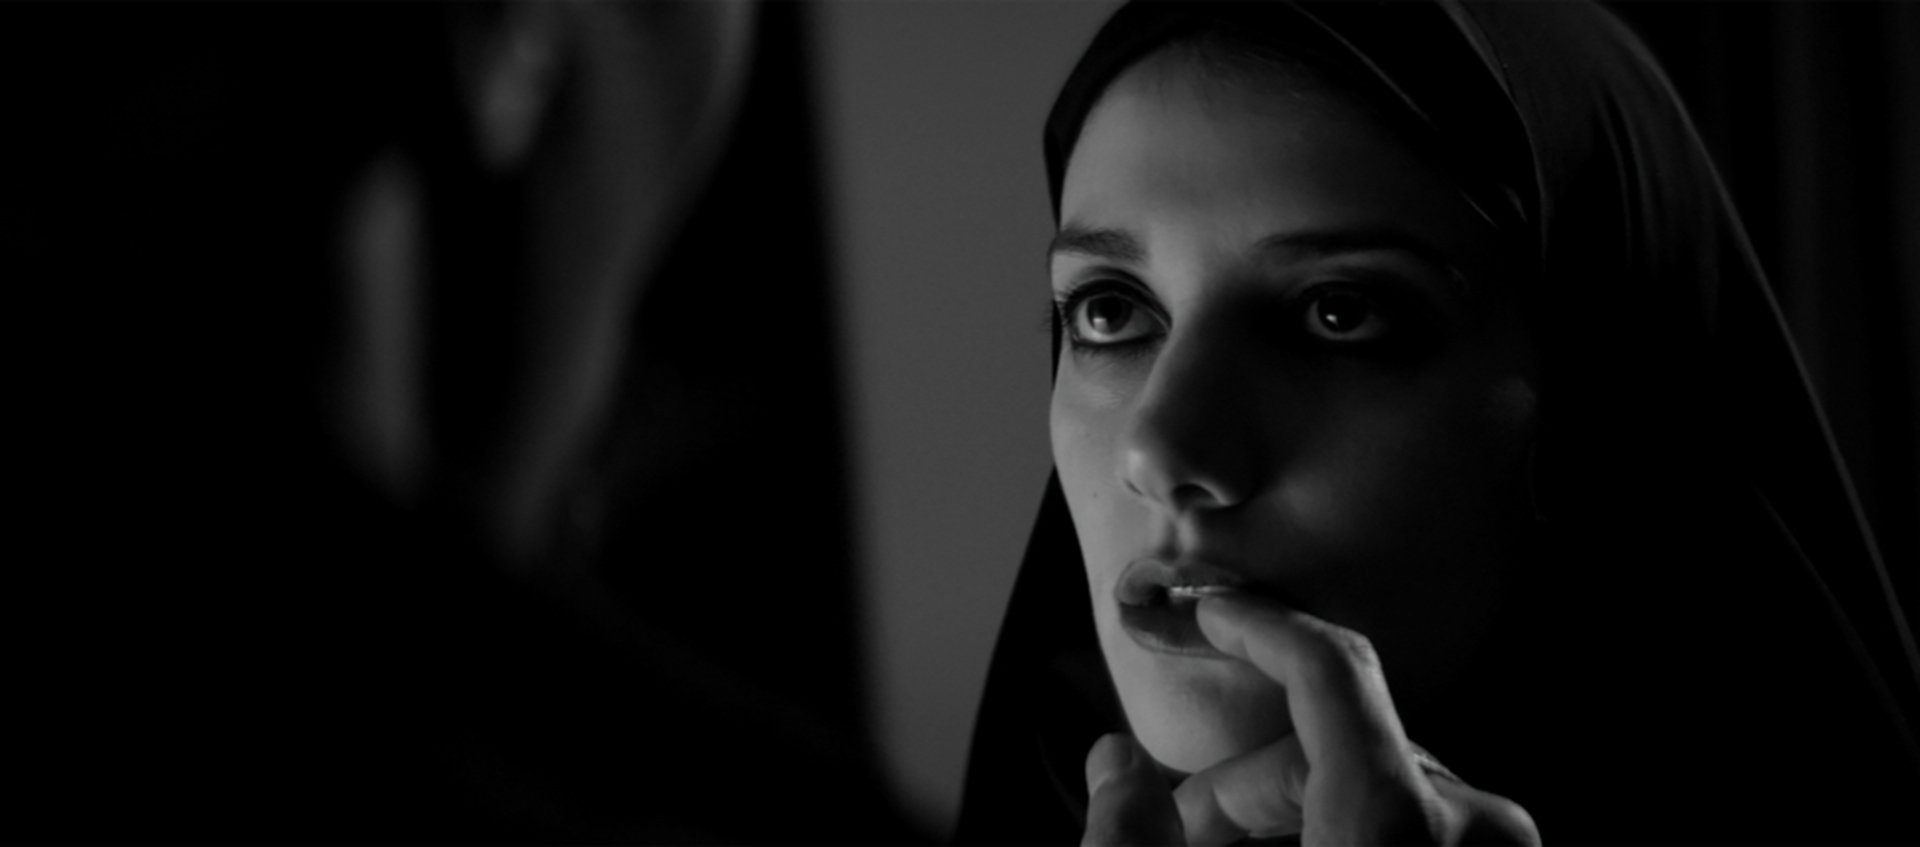 The Girl looking into the distance and wearing a dark chador. The left side of the image is blacked out due to someone is standing in front of the Girl. The unknown person’s finger is touching the Girl’s bottom lip.